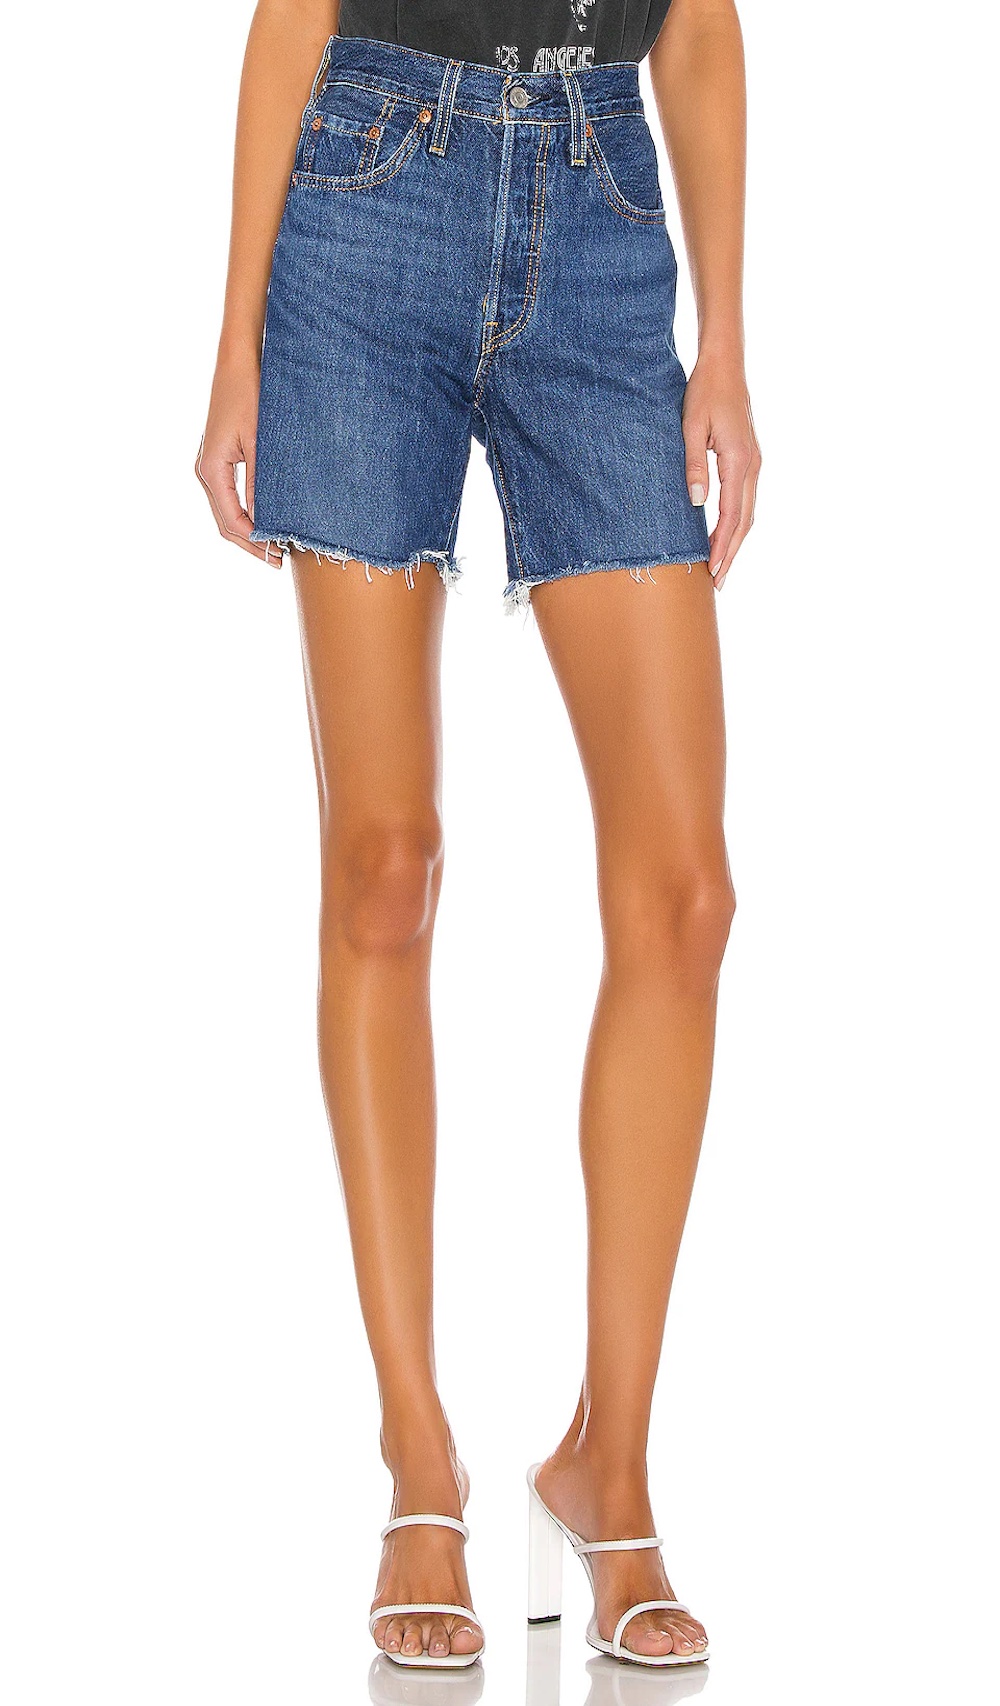 Levi's Women's Button-Fly Shorts: 501 Mid (Sansome Nights) $25, Ribcage $29 | 501 Cropped Jeans (Athens Slide) $54 + FS